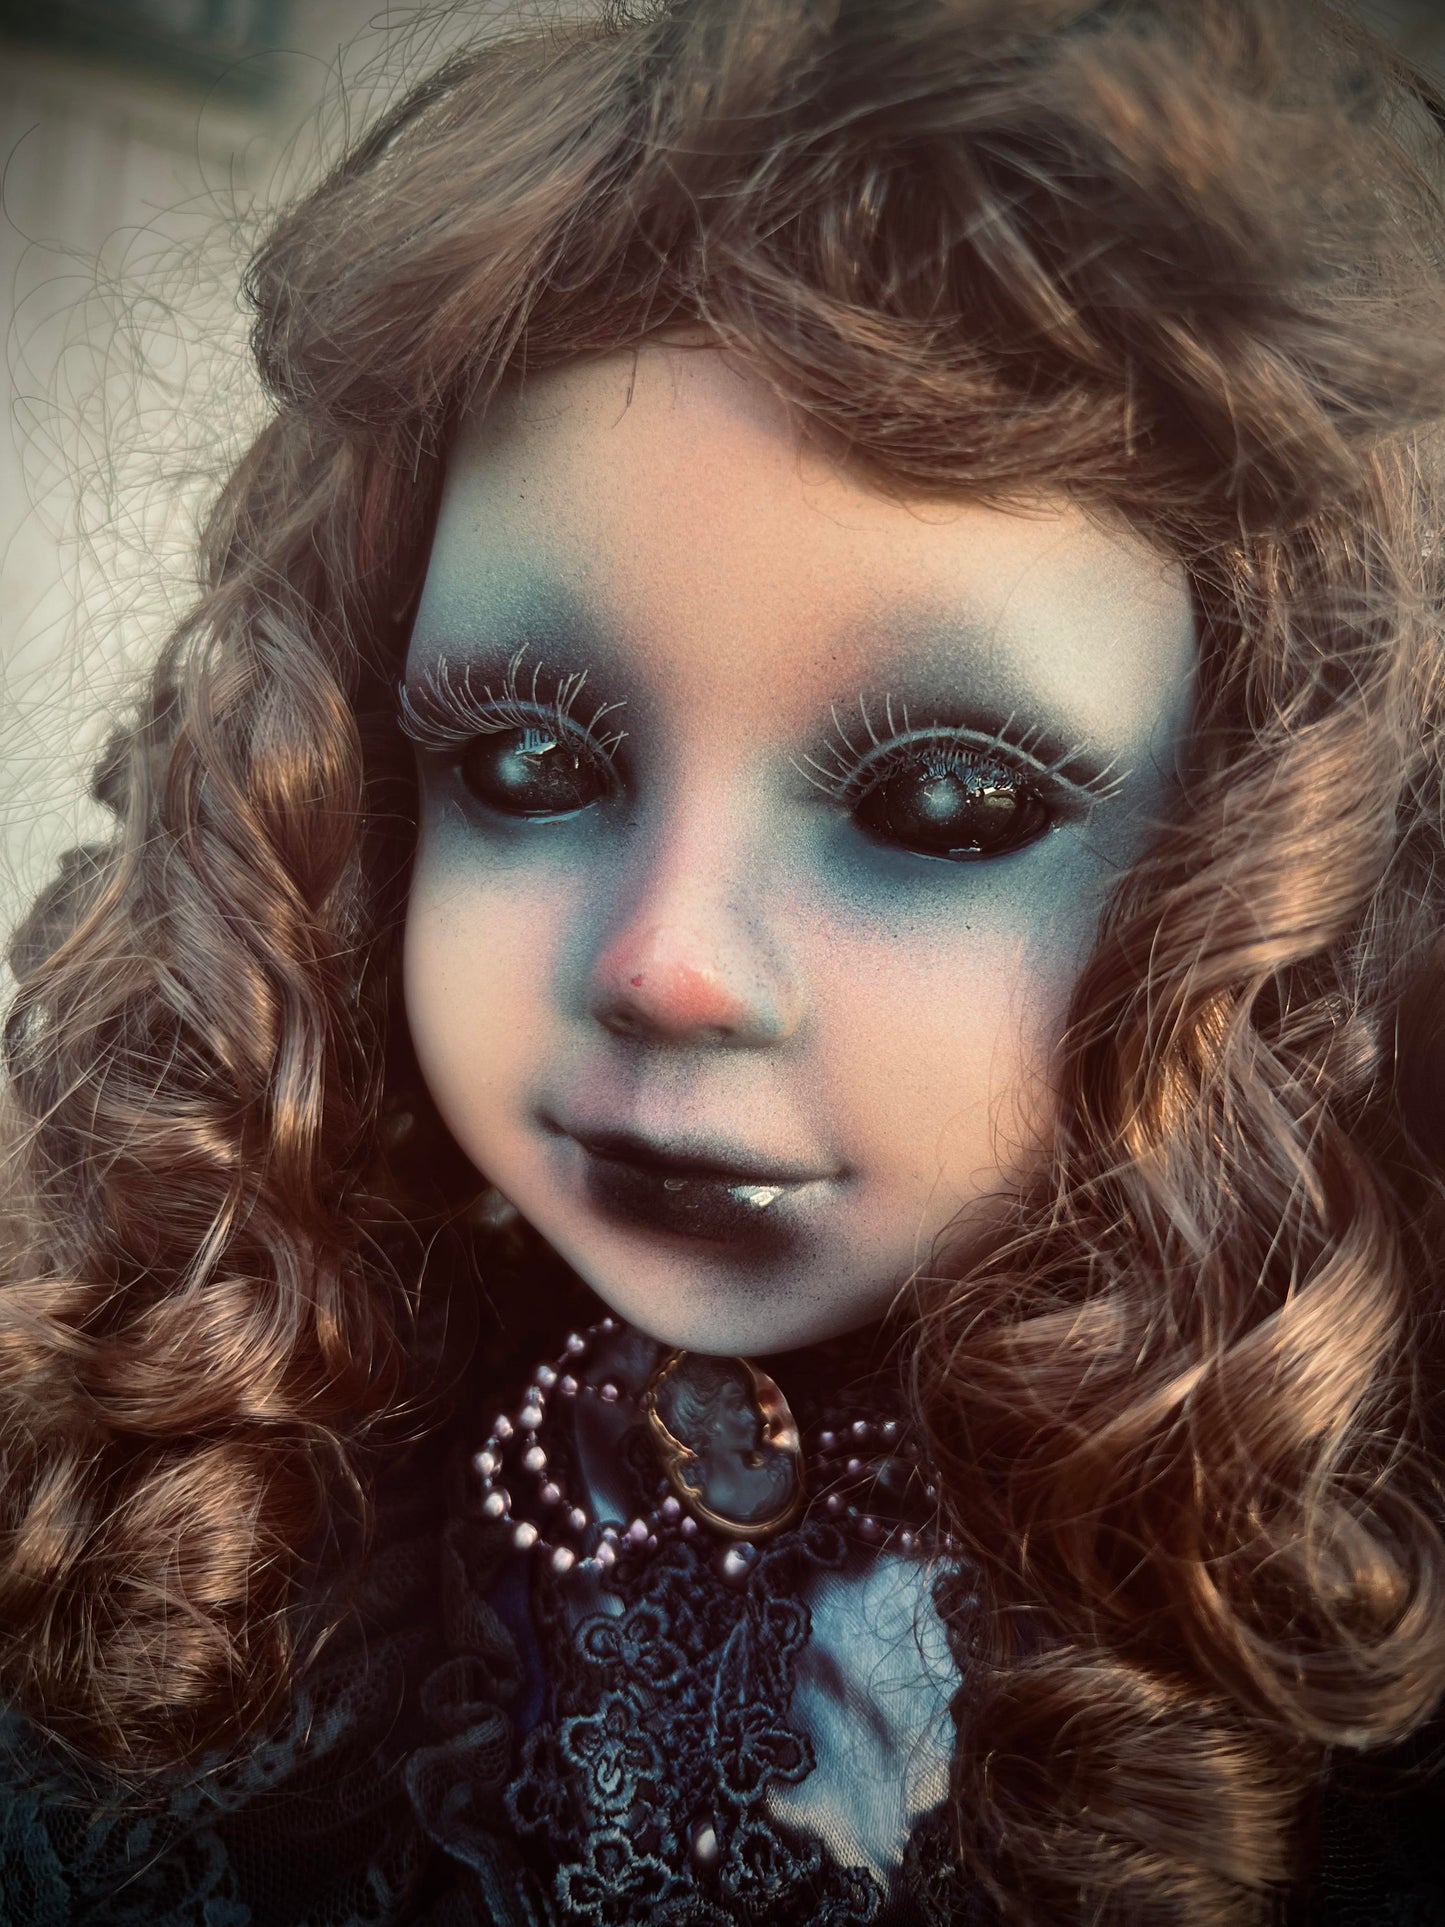 Meet Leola 25" Doll Porcelain Witchy Creepy Haunted Spirit Infected Scary Poltergeist Spooky Zombie Possessed Fall Gothic Positive Energy